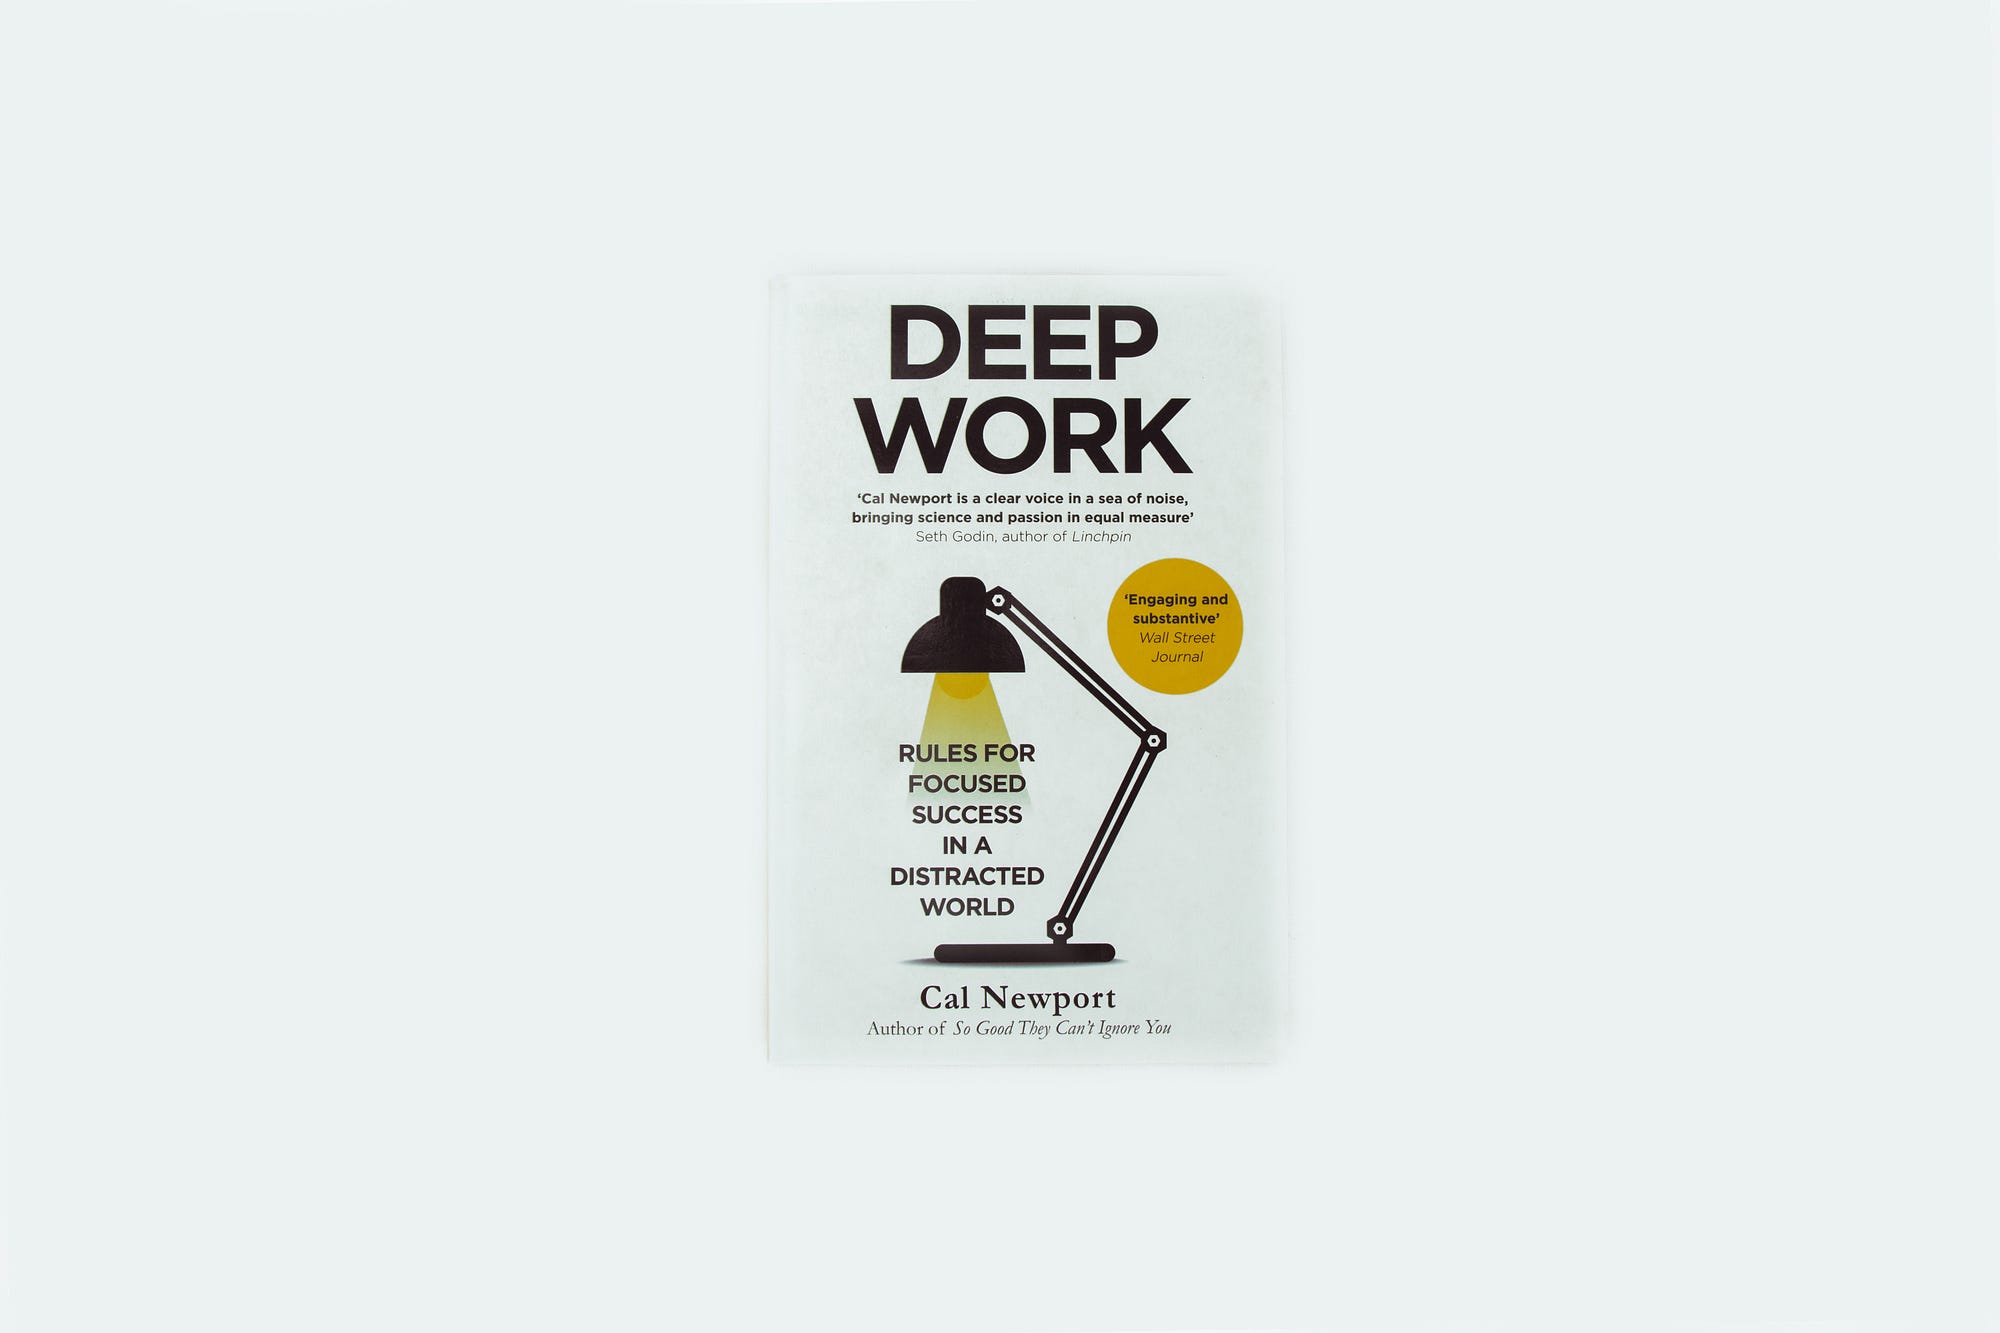 Book Summary - Deep Work: Rules for Focused Success in a Distracted World